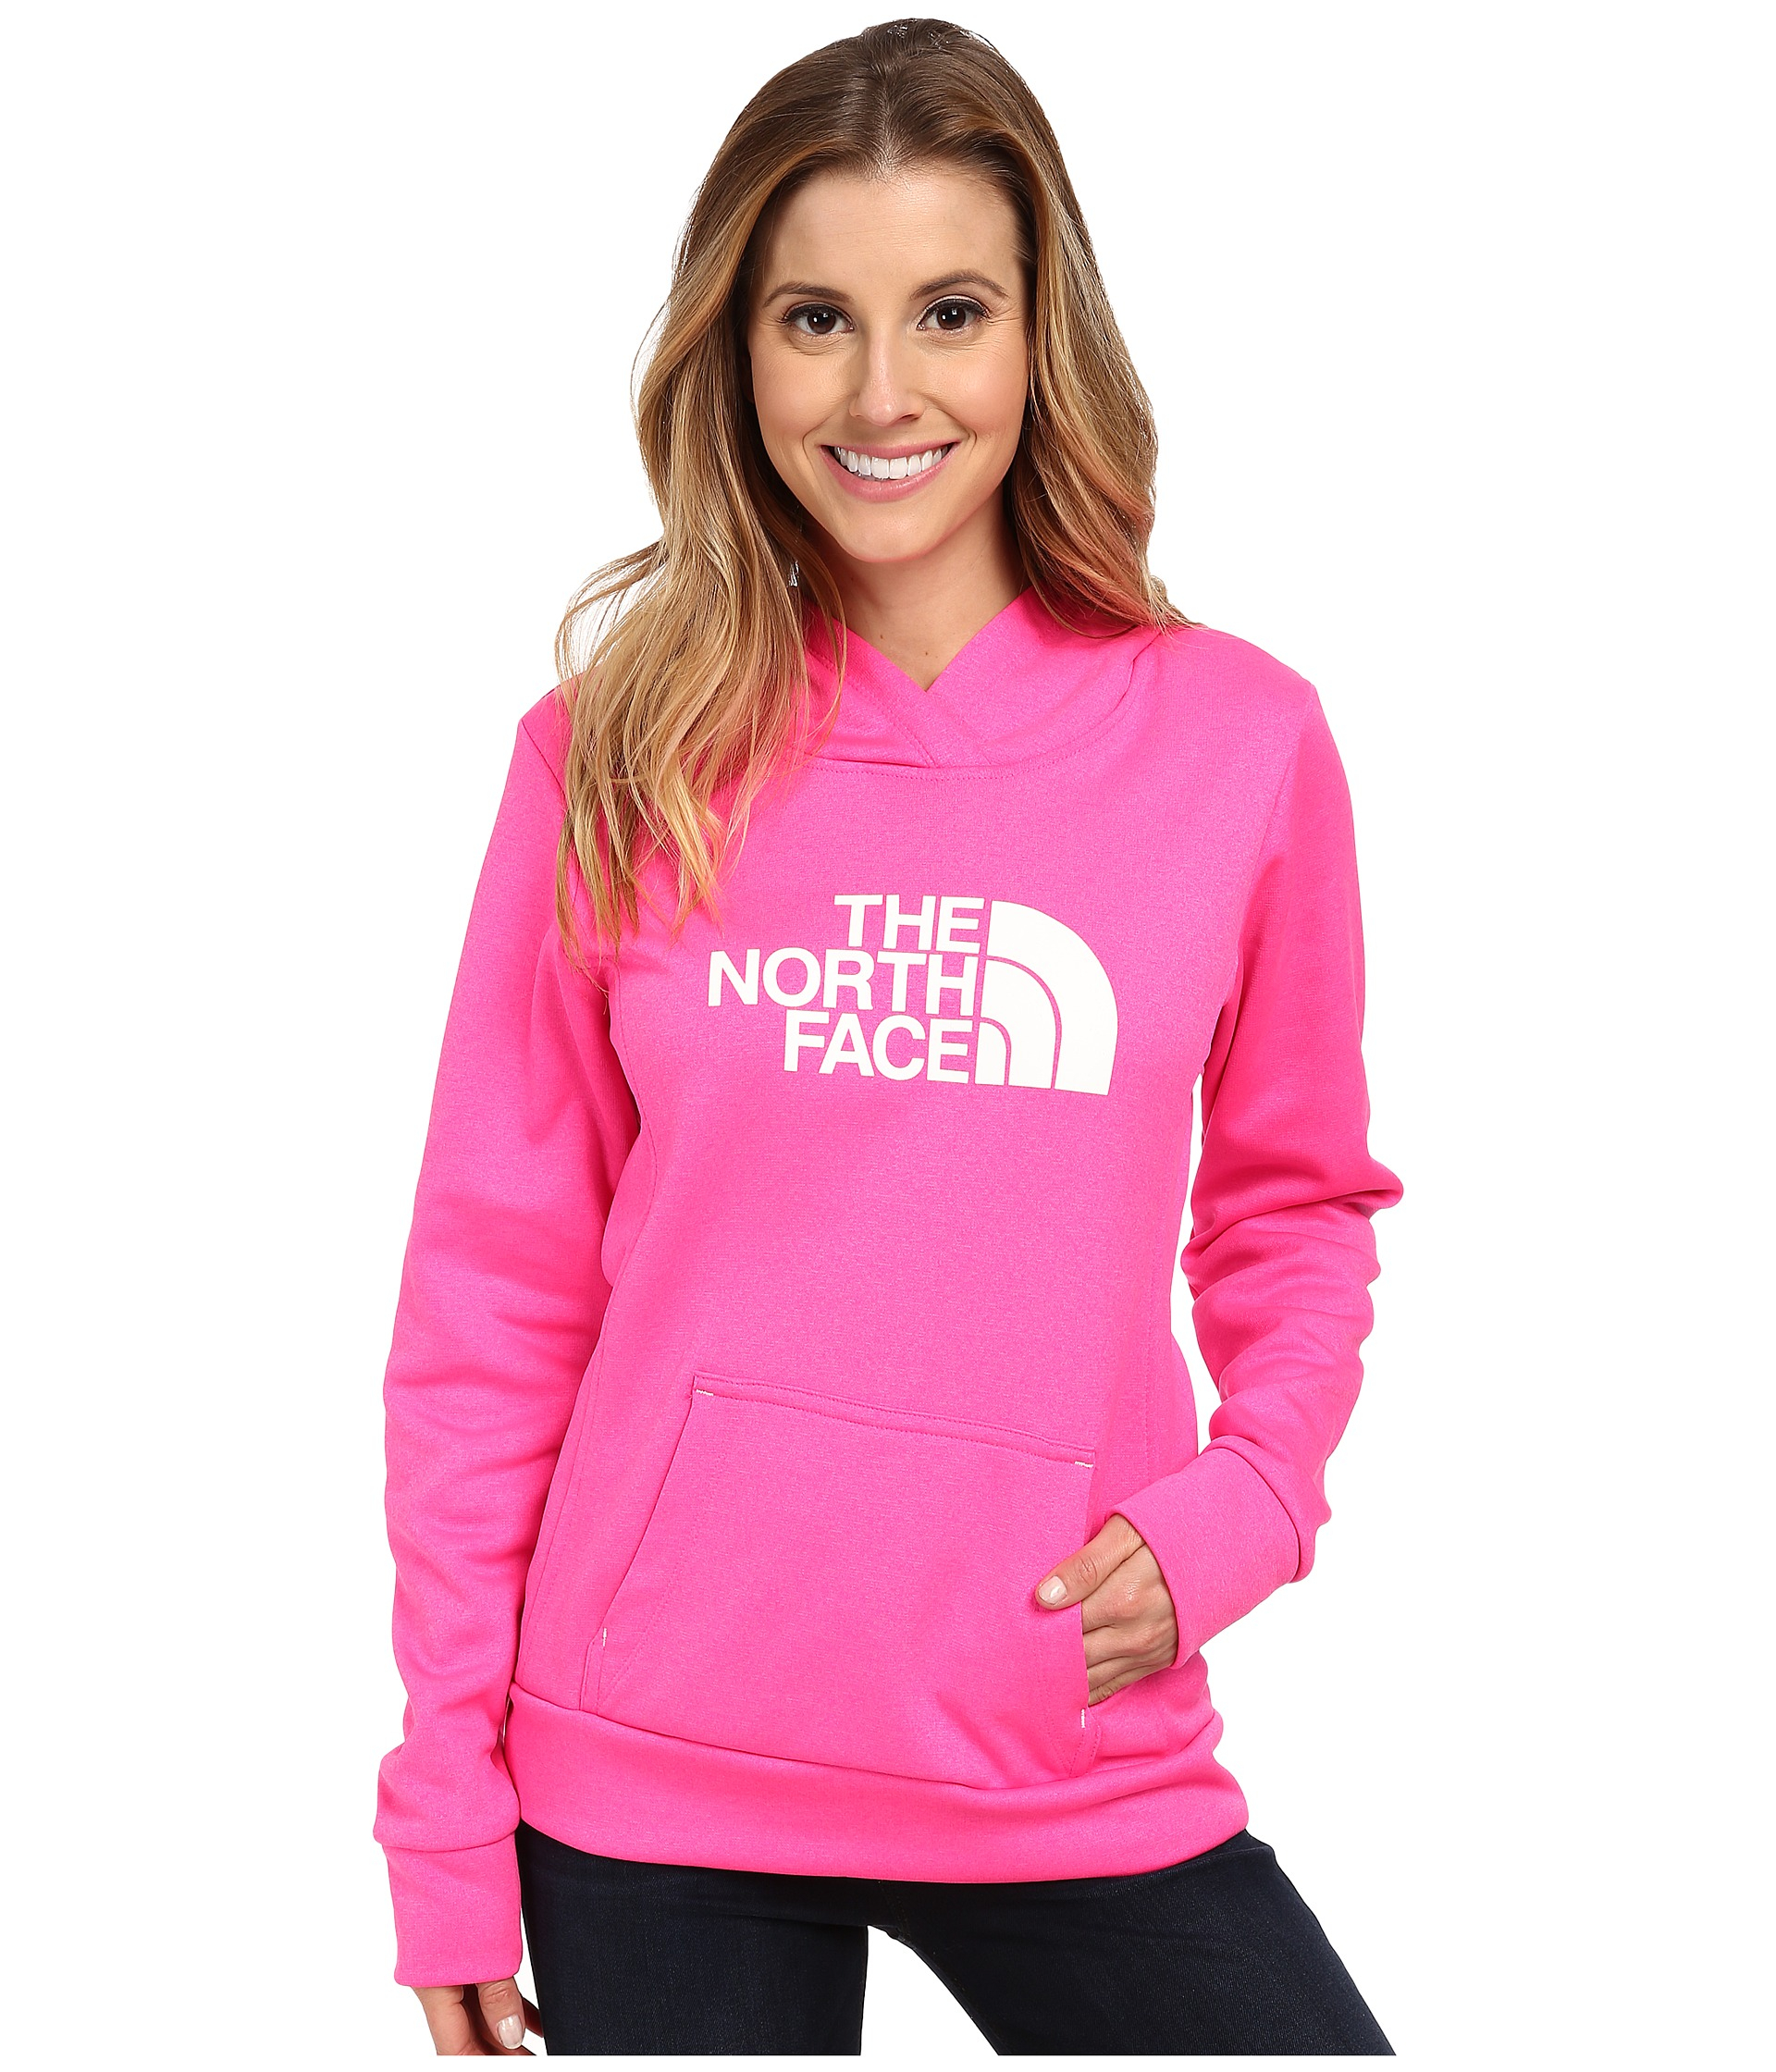 the north face hoodie pink